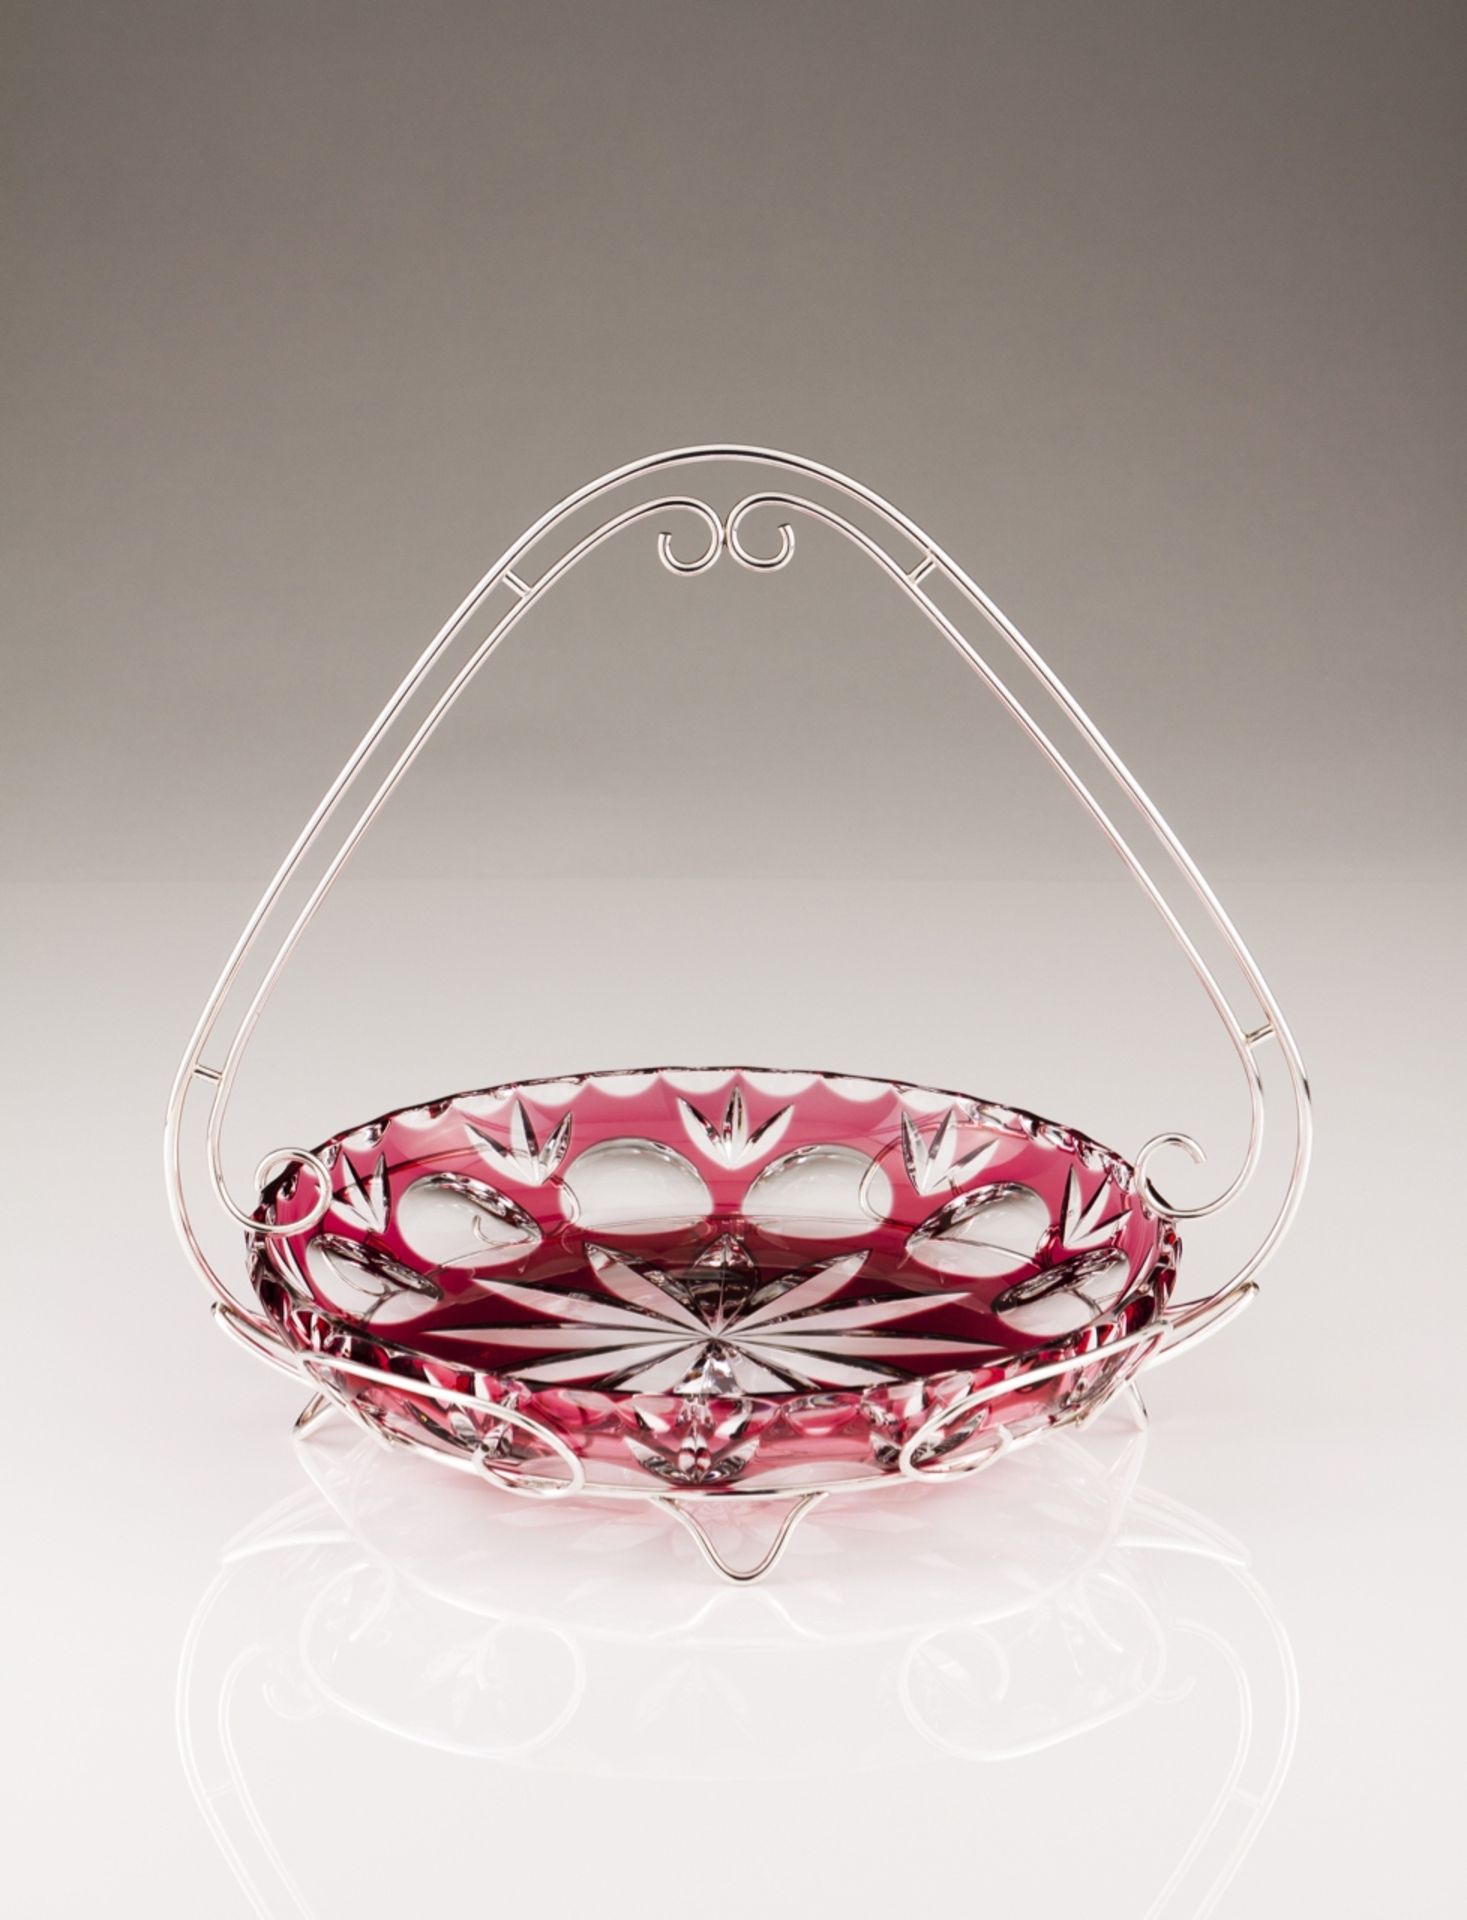 A crystal and Portuguese silver fruit bowl
Red and colorless overlay crystal, silver mount and